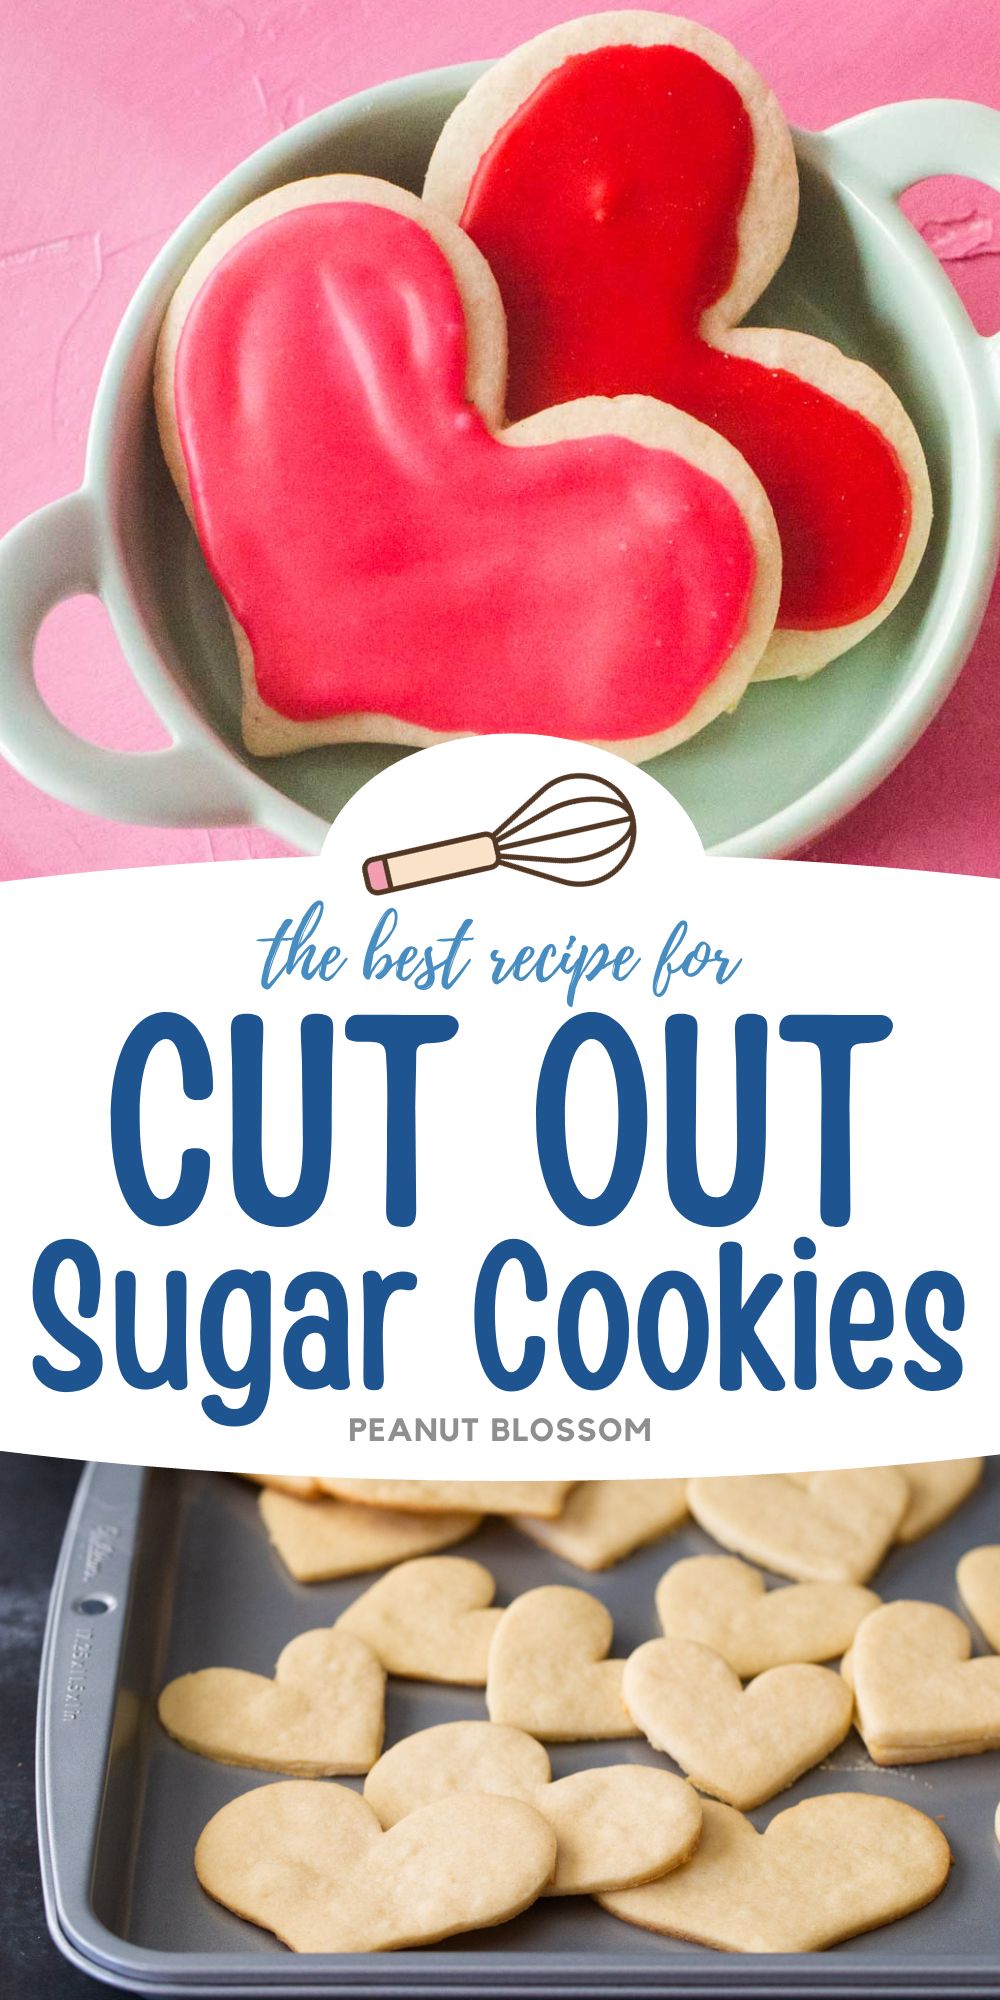 The photo collage shows two heart shaped cut out sugar cookies in a serving dish next to a baking pan filled with baked cookies.